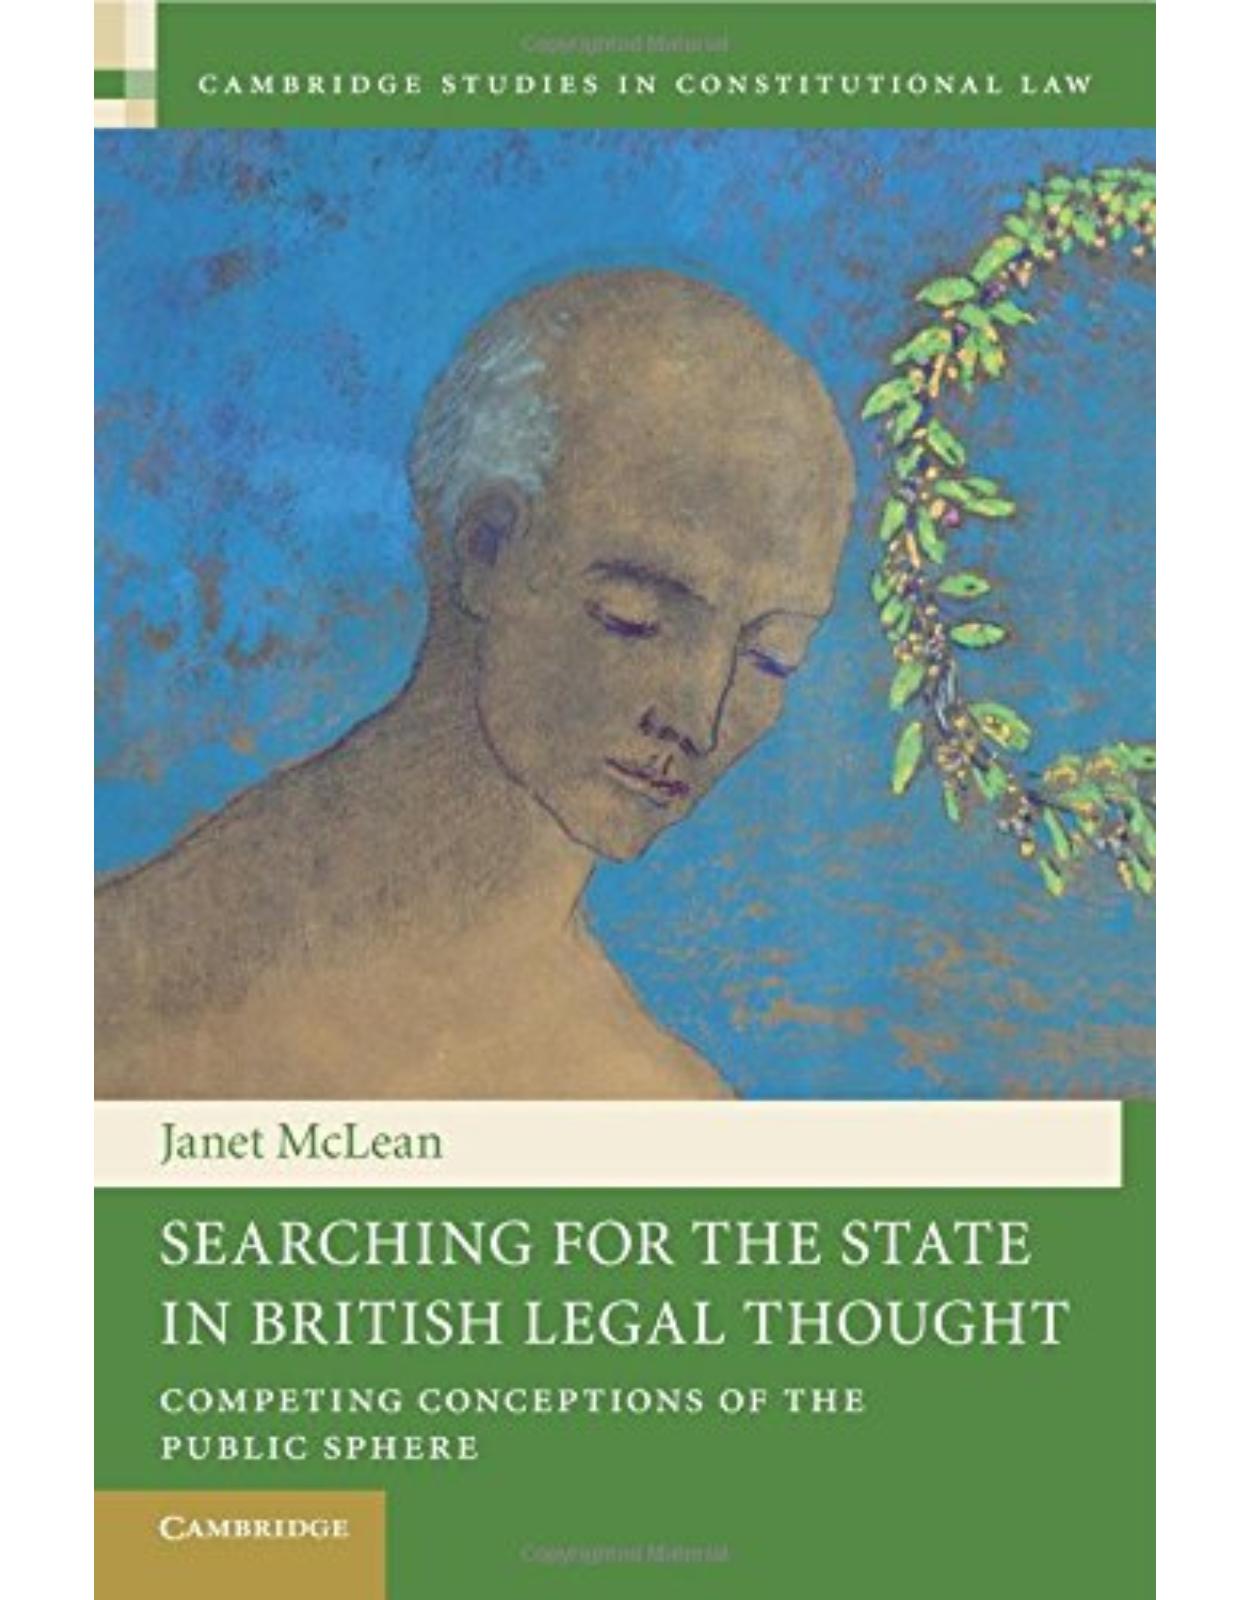 Searching for the State in British Legal Thought: Competing Conceptions of the Public Sphere (Cambridge Studies in Constitutional Law)